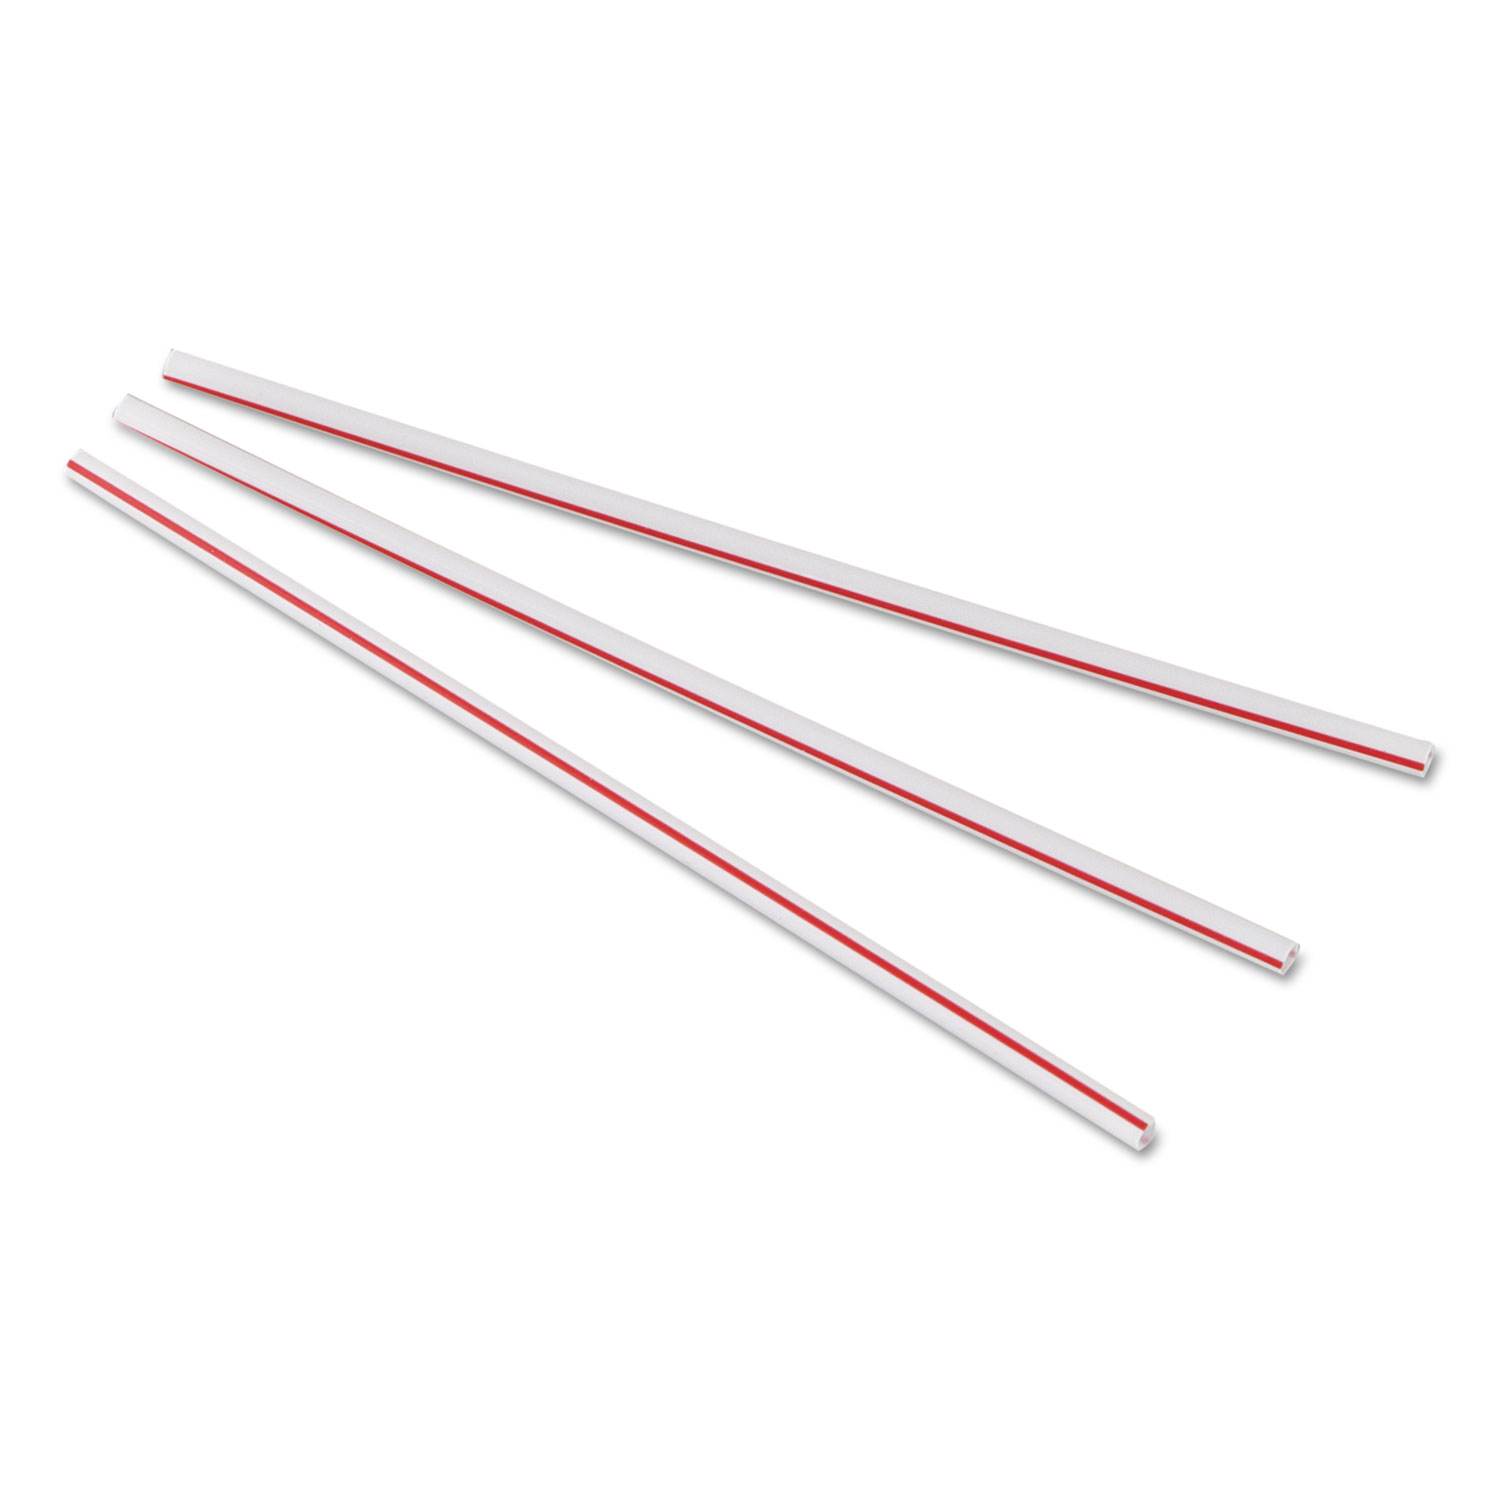  Dixie HS551 Unwrapped Hollow Stir-Straws, 5 1/2, Plastic, White/Red, 1000/Box, 10 Boxes/Ct (DXEHS551) 